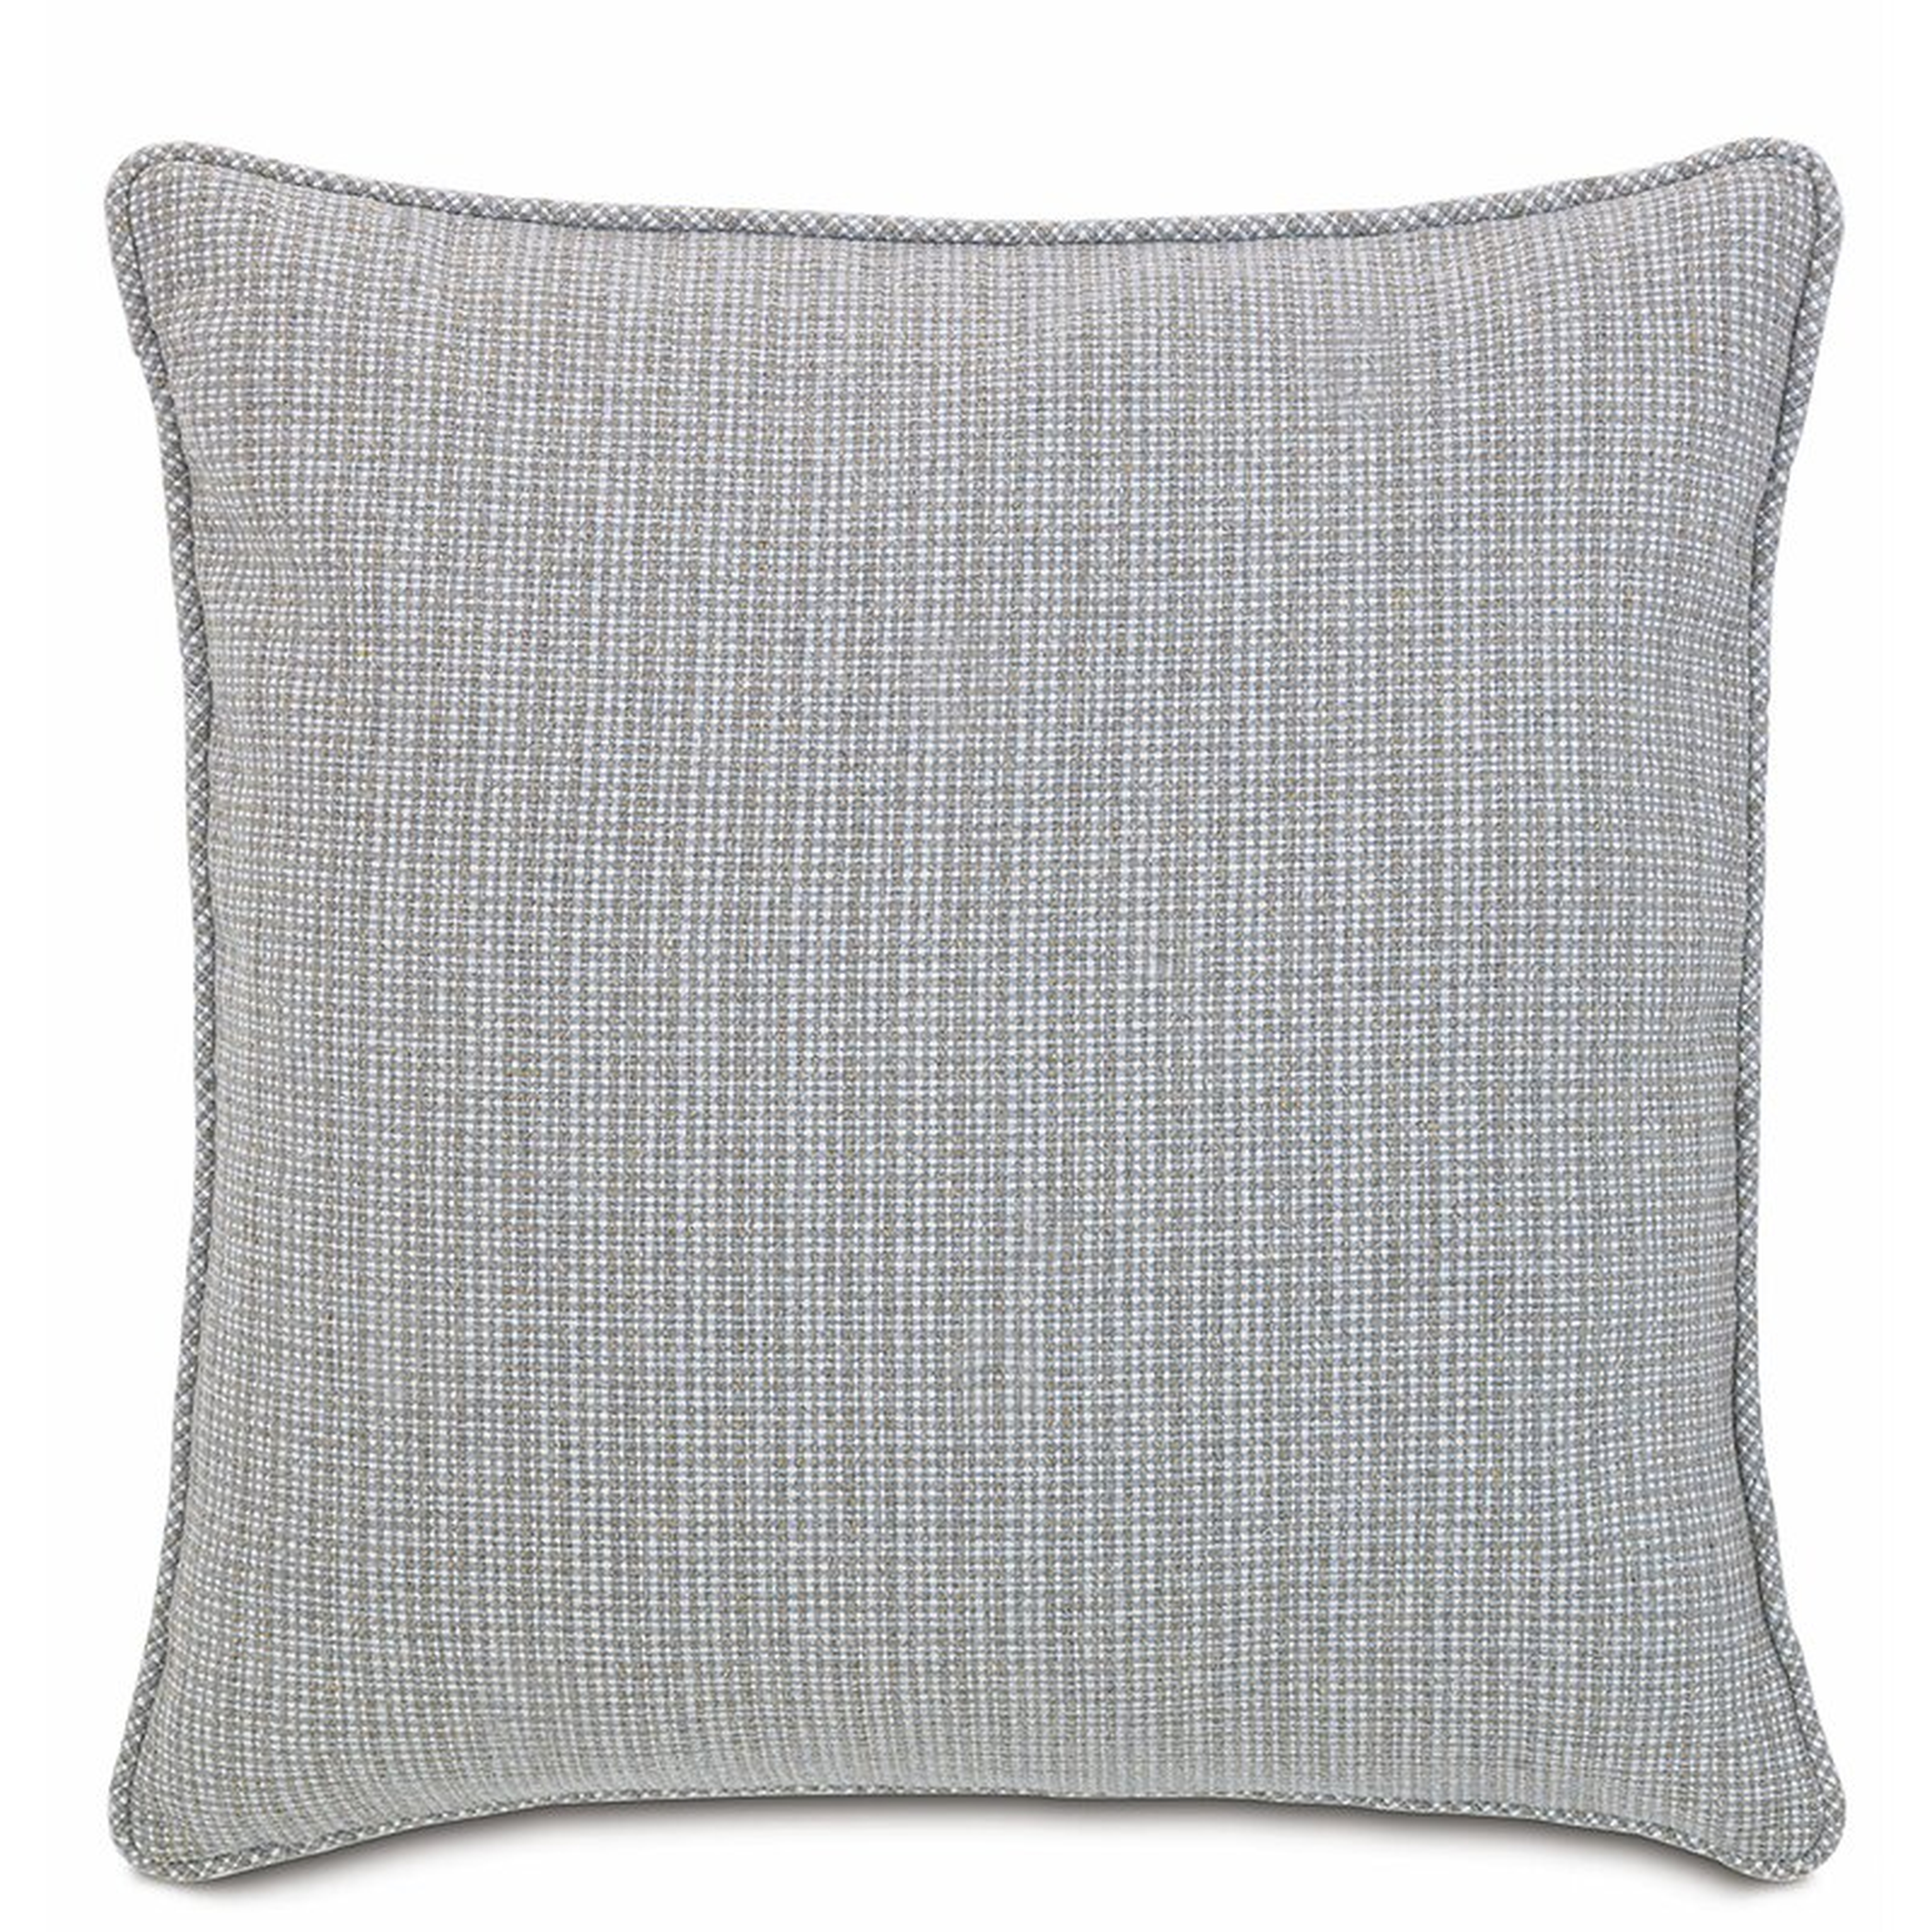 Eastern Accents Blake Fleck Throw Pillow Cover & Insert - Perigold